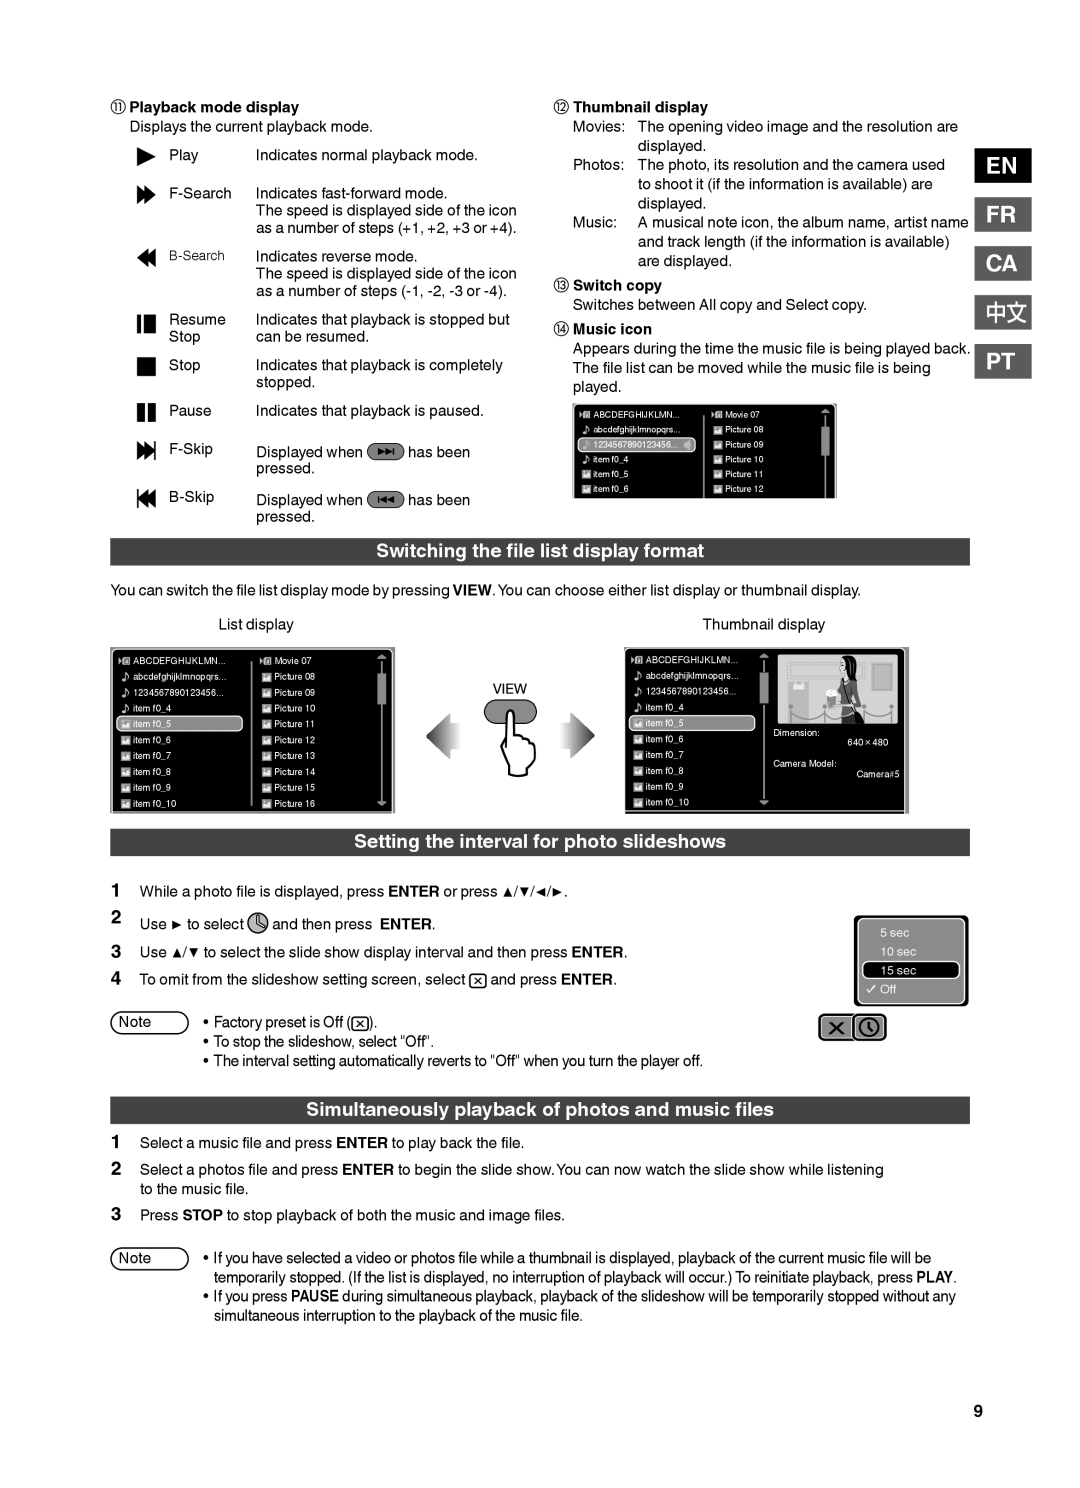 JVC CU-VS100U Switching the ﬁle list display format, Setting the interval for photo slideshows, En Fr Ca, ⑬ Switch copy 